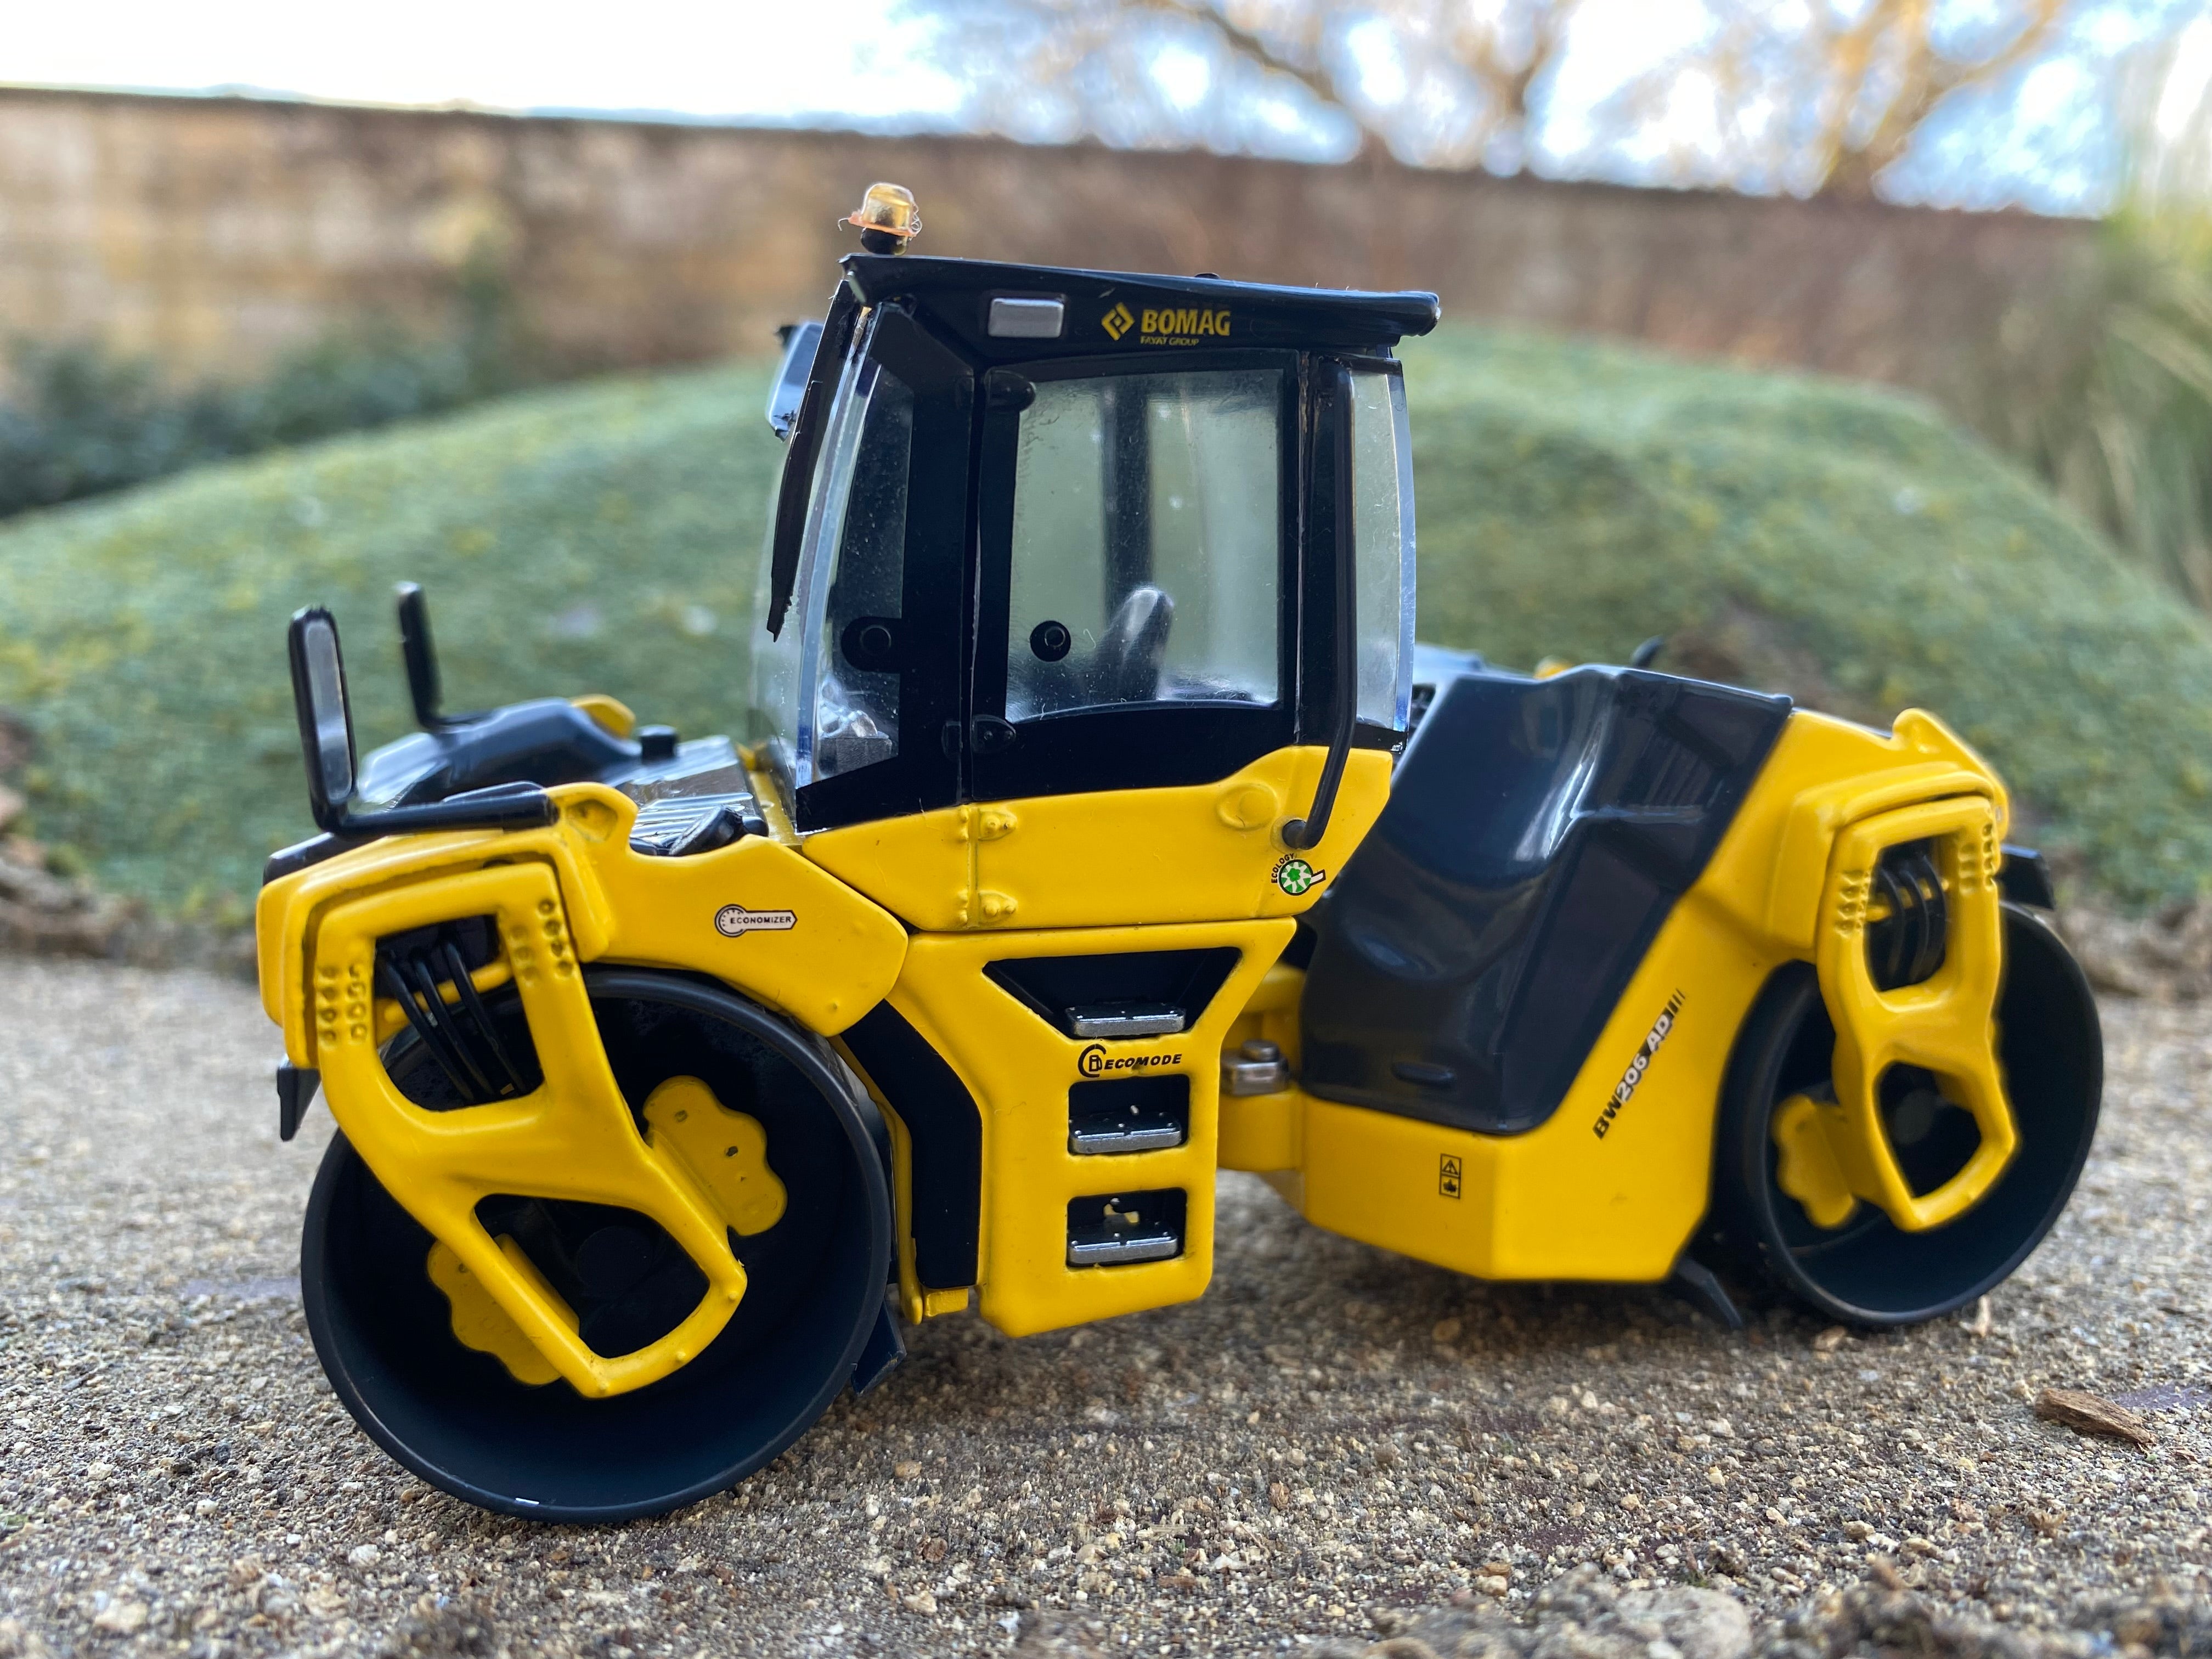 BOMAG BW 206 AD-5 Roller. 1:50 Scale